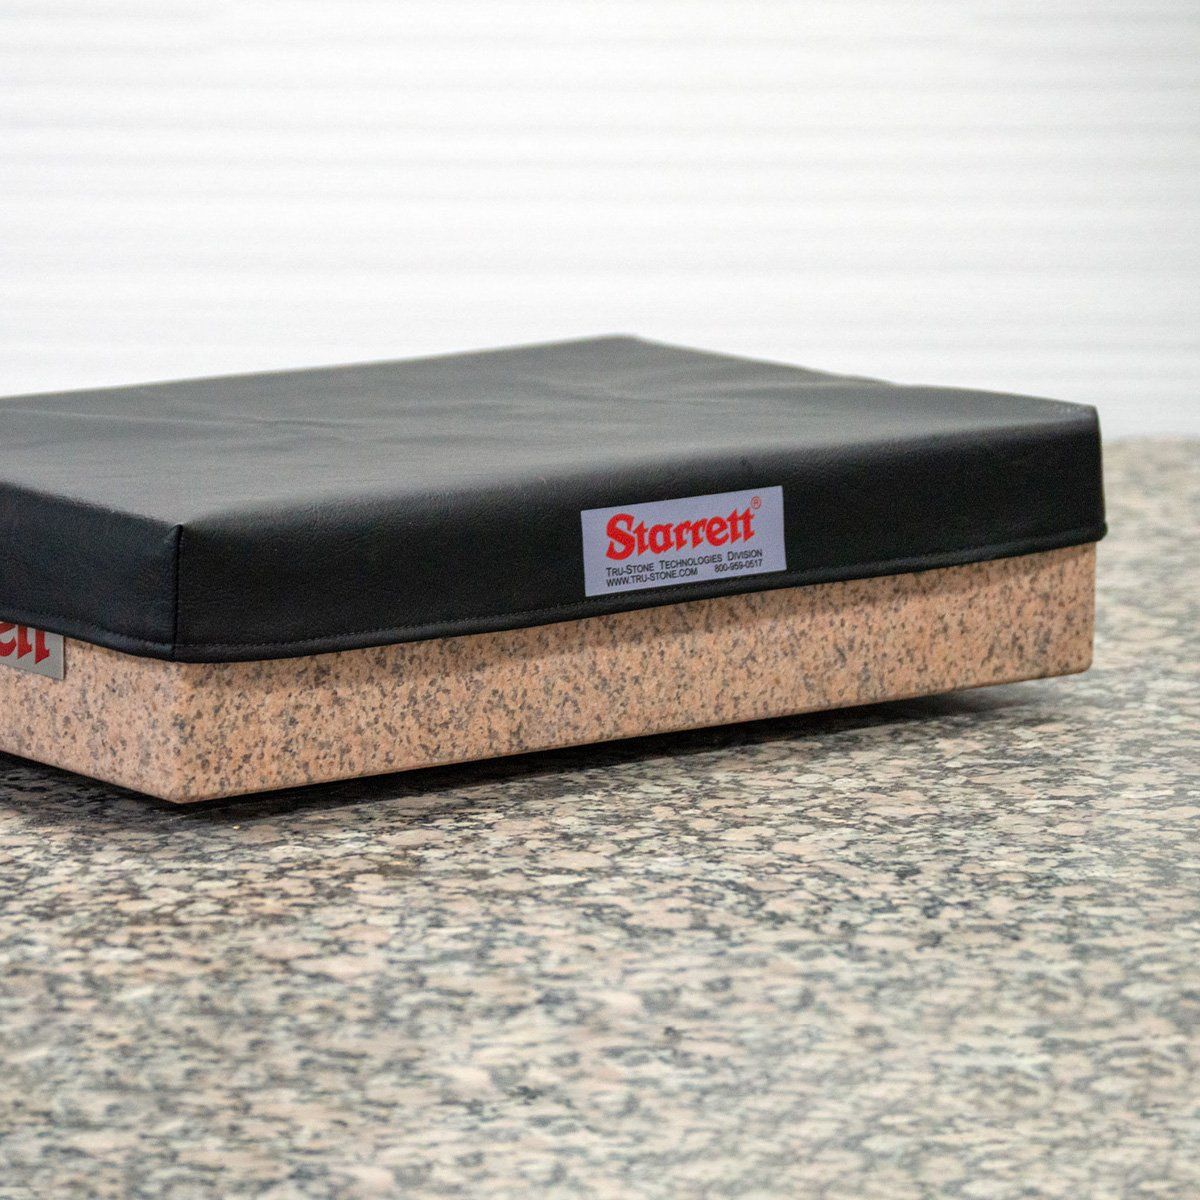 Black fabric surface plate cover with Starrett logo